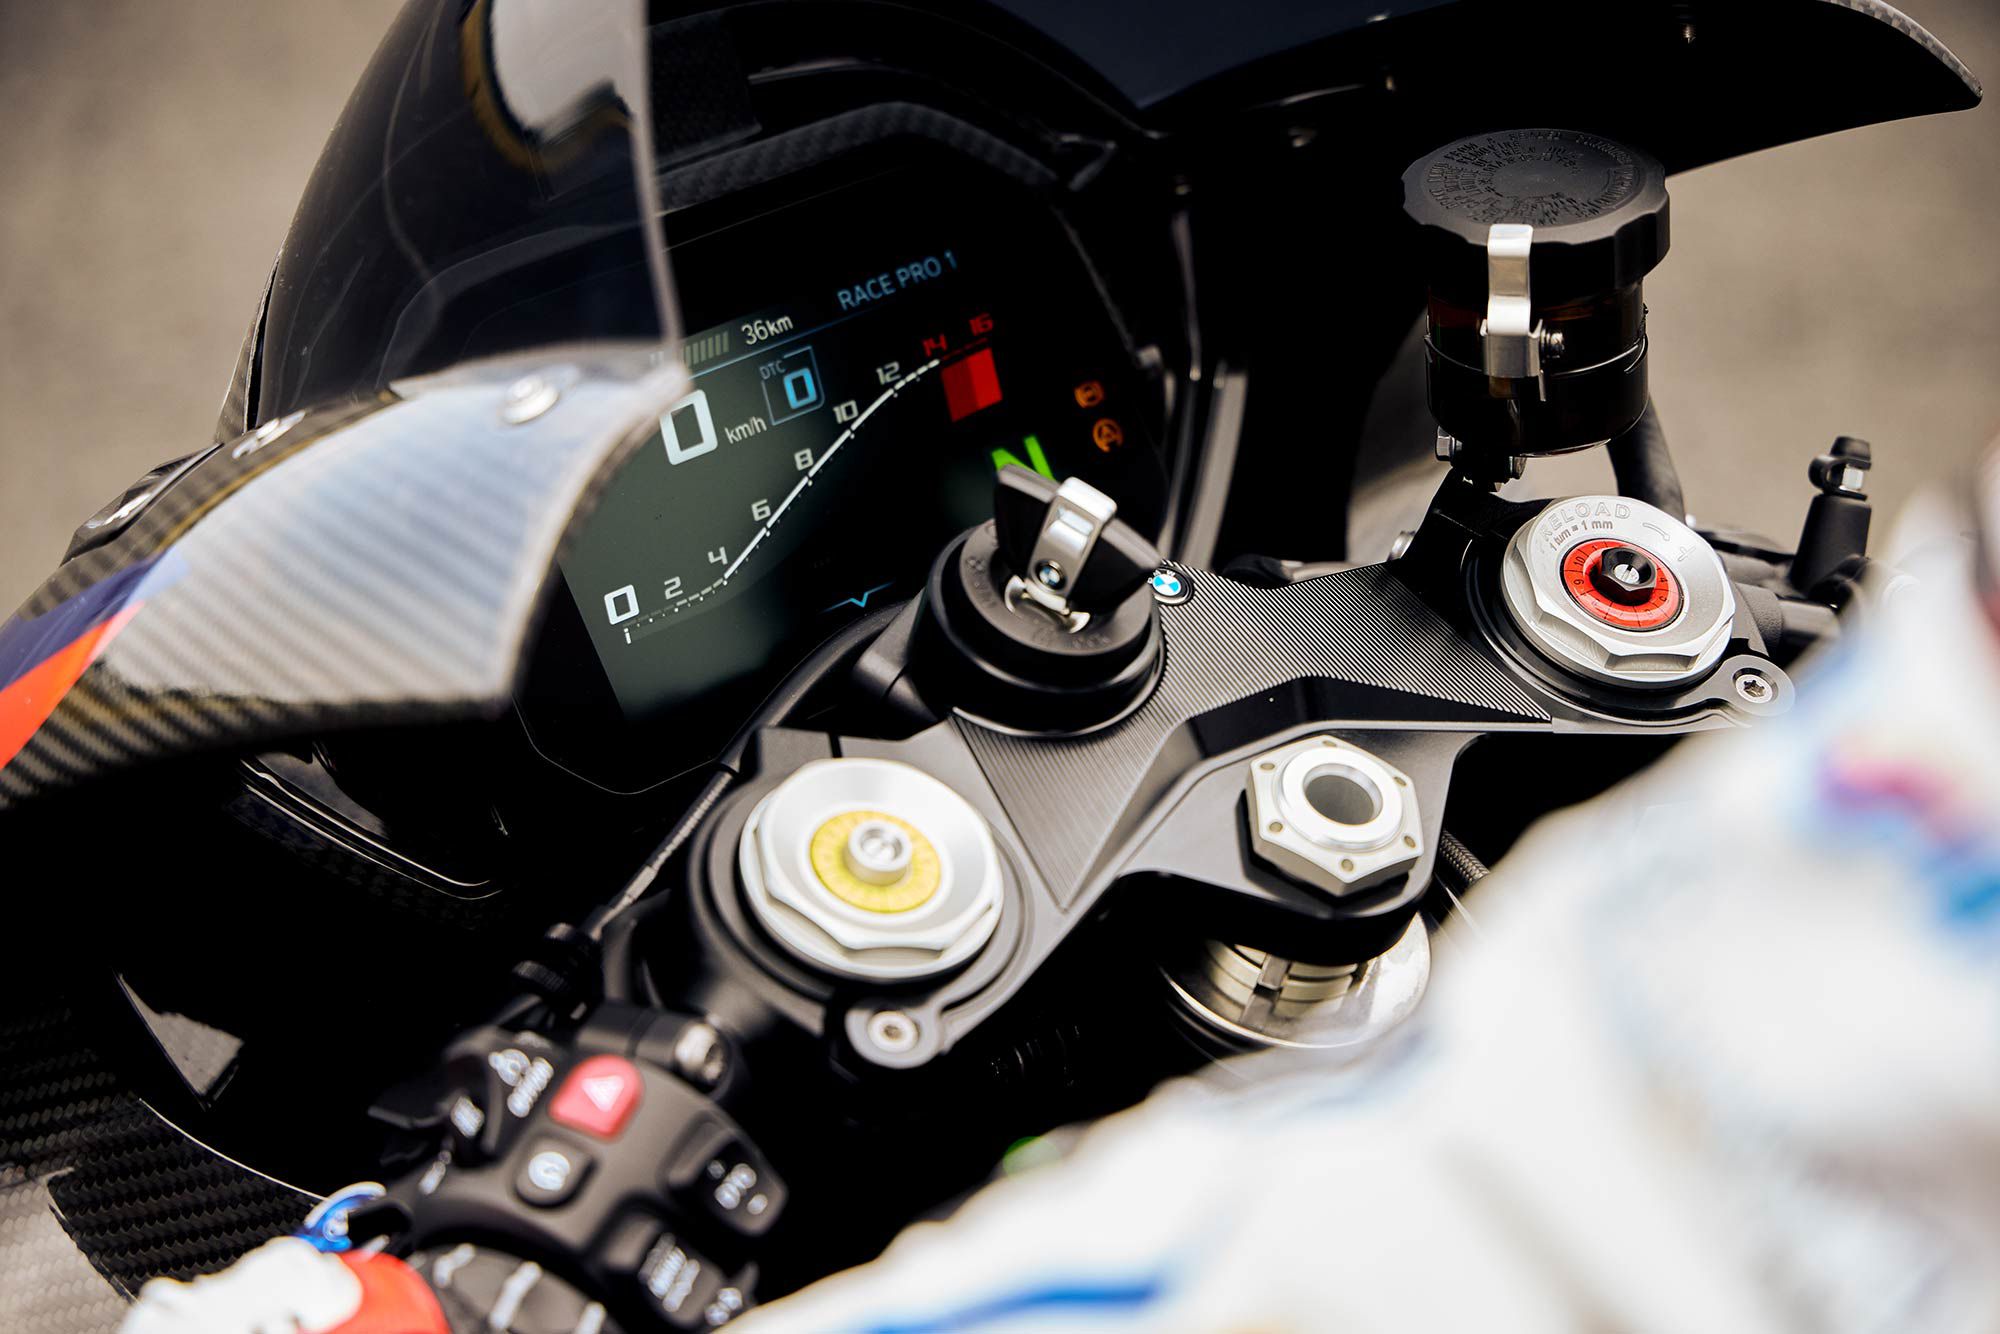 Turn key to see the god of your choosing: the 6.5-inch TFT and cockpit of the BMW M 1000 RR.